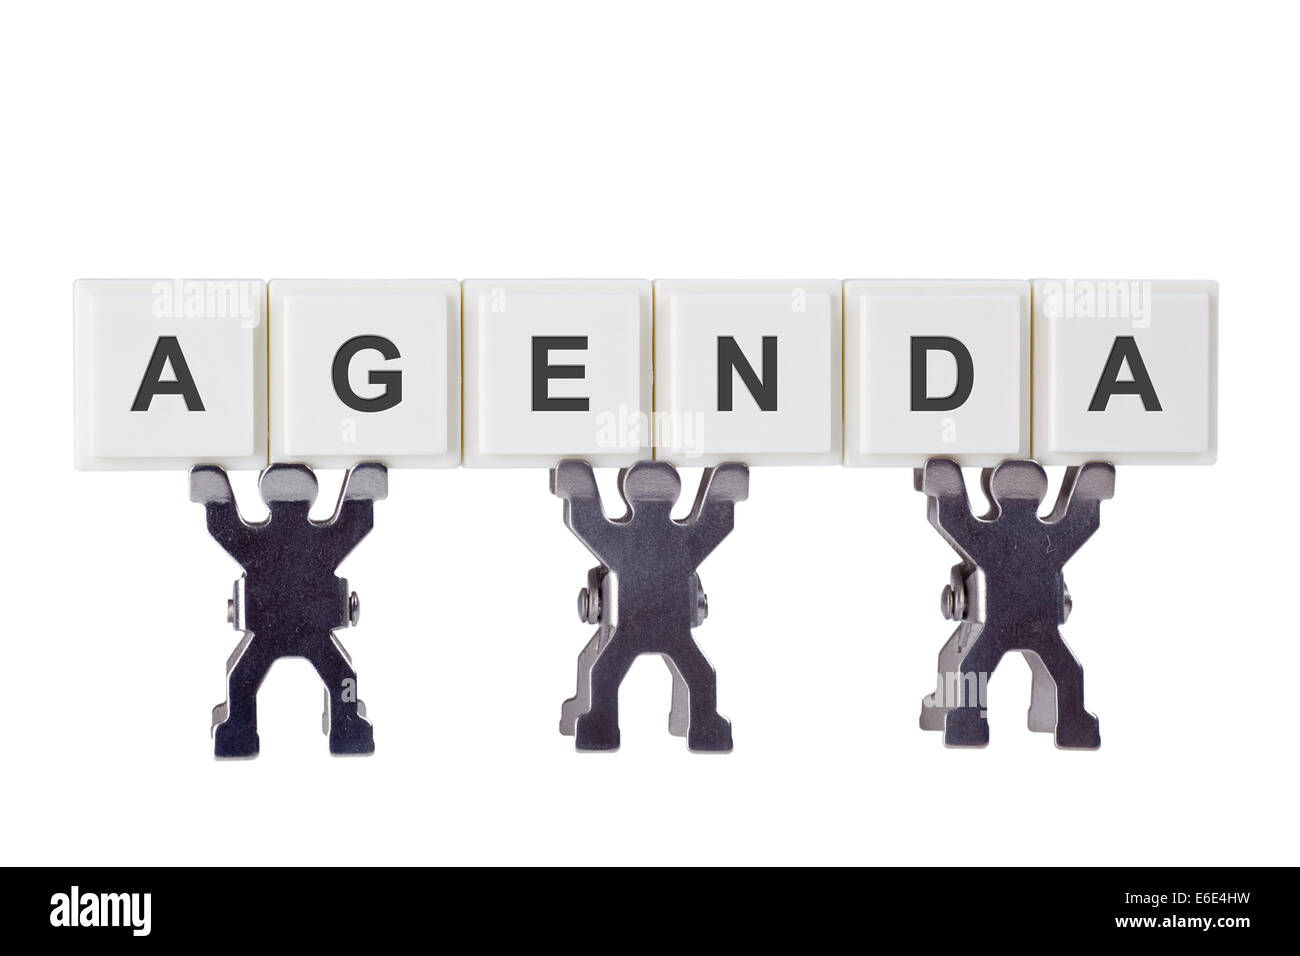 Figurine with the word AGENDA isolated on white background Stock Photo